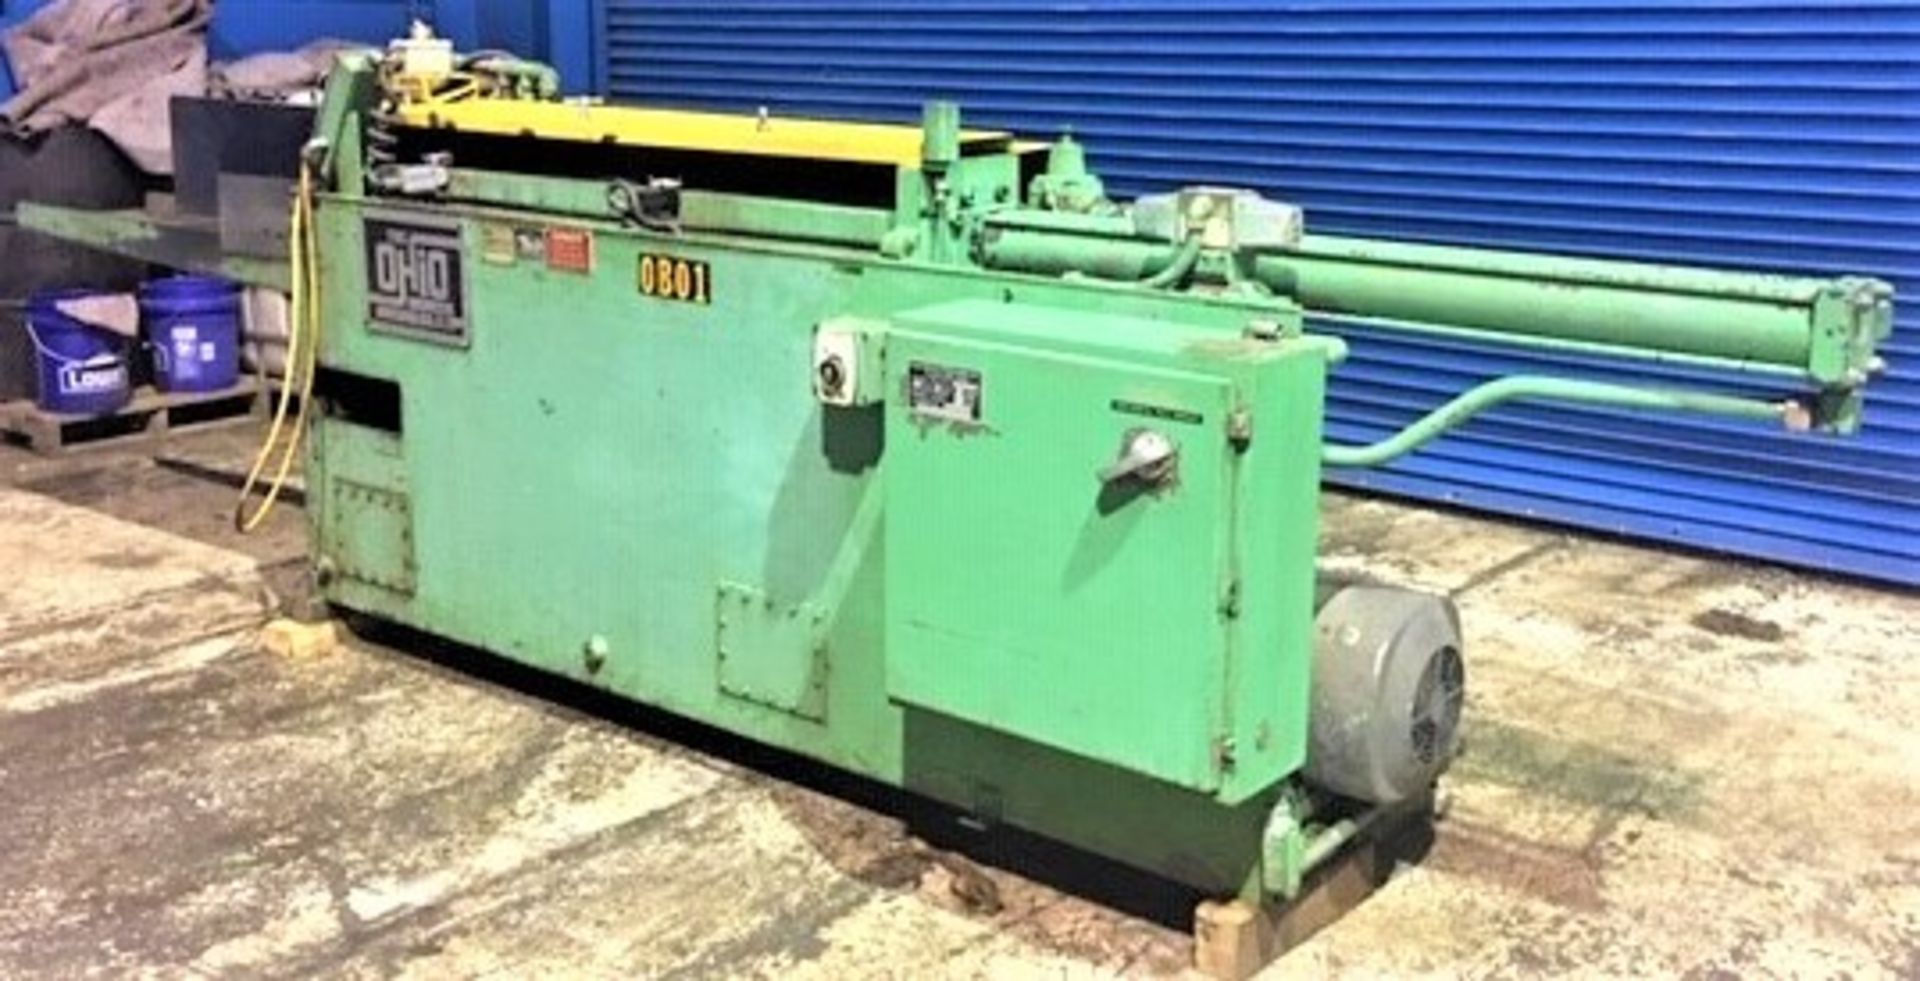 Ohio Horizontal Broaching Machine | 5 Ton x 48", Mdl: H548RR, S/N: 18125-76, Located In: - Image 2 of 15